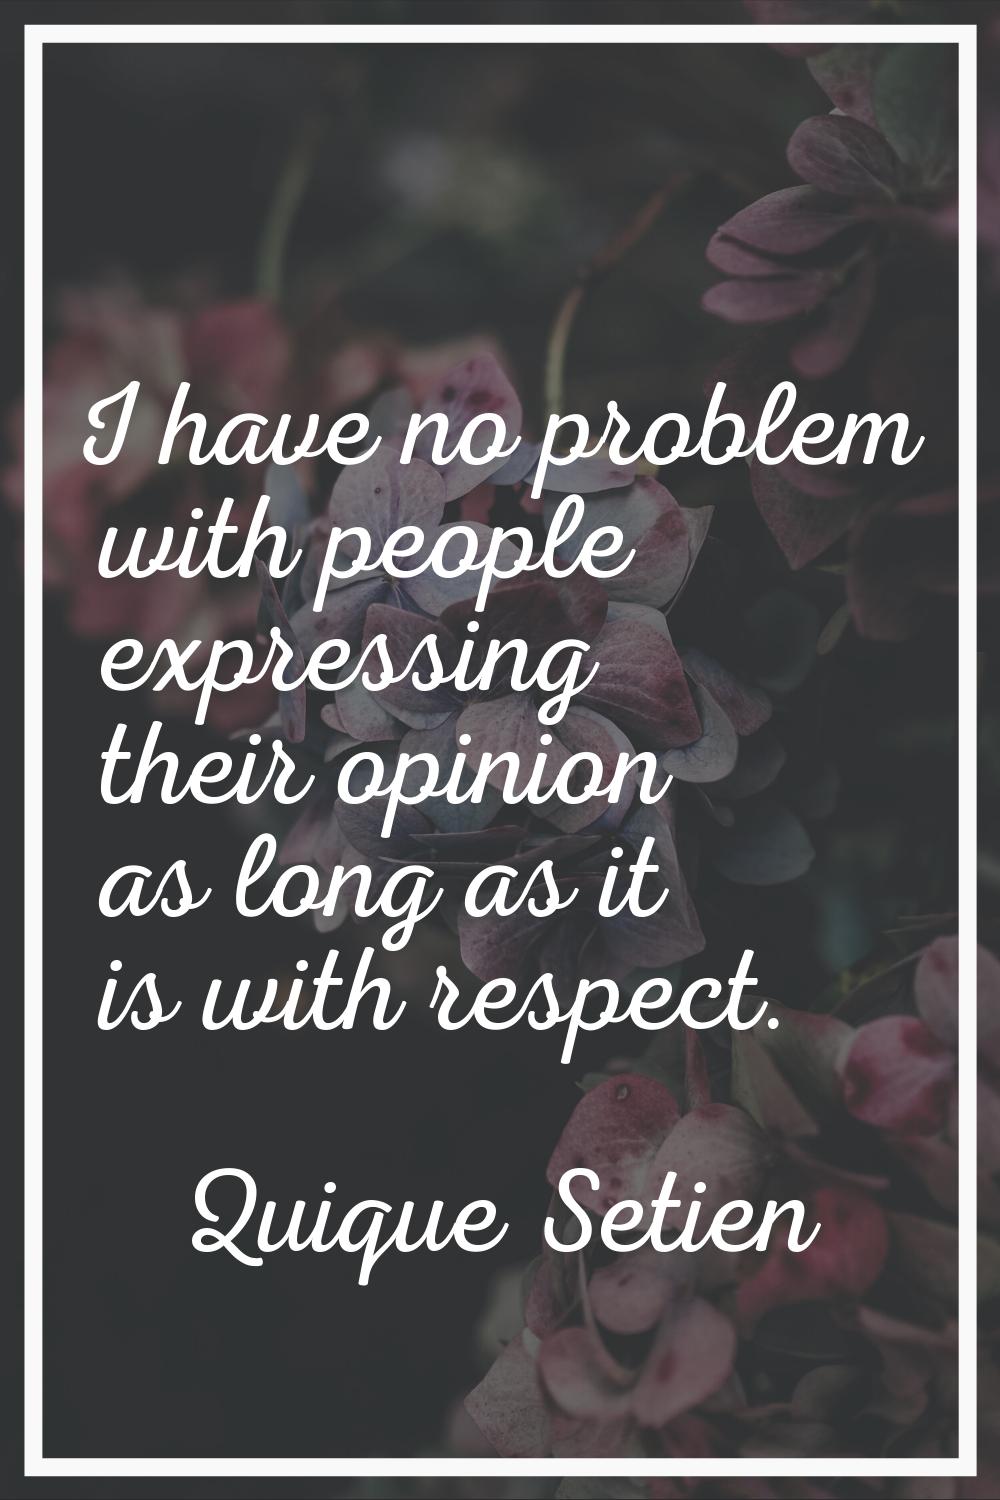 I have no problem with people expressing their opinion as long as it is with respect.